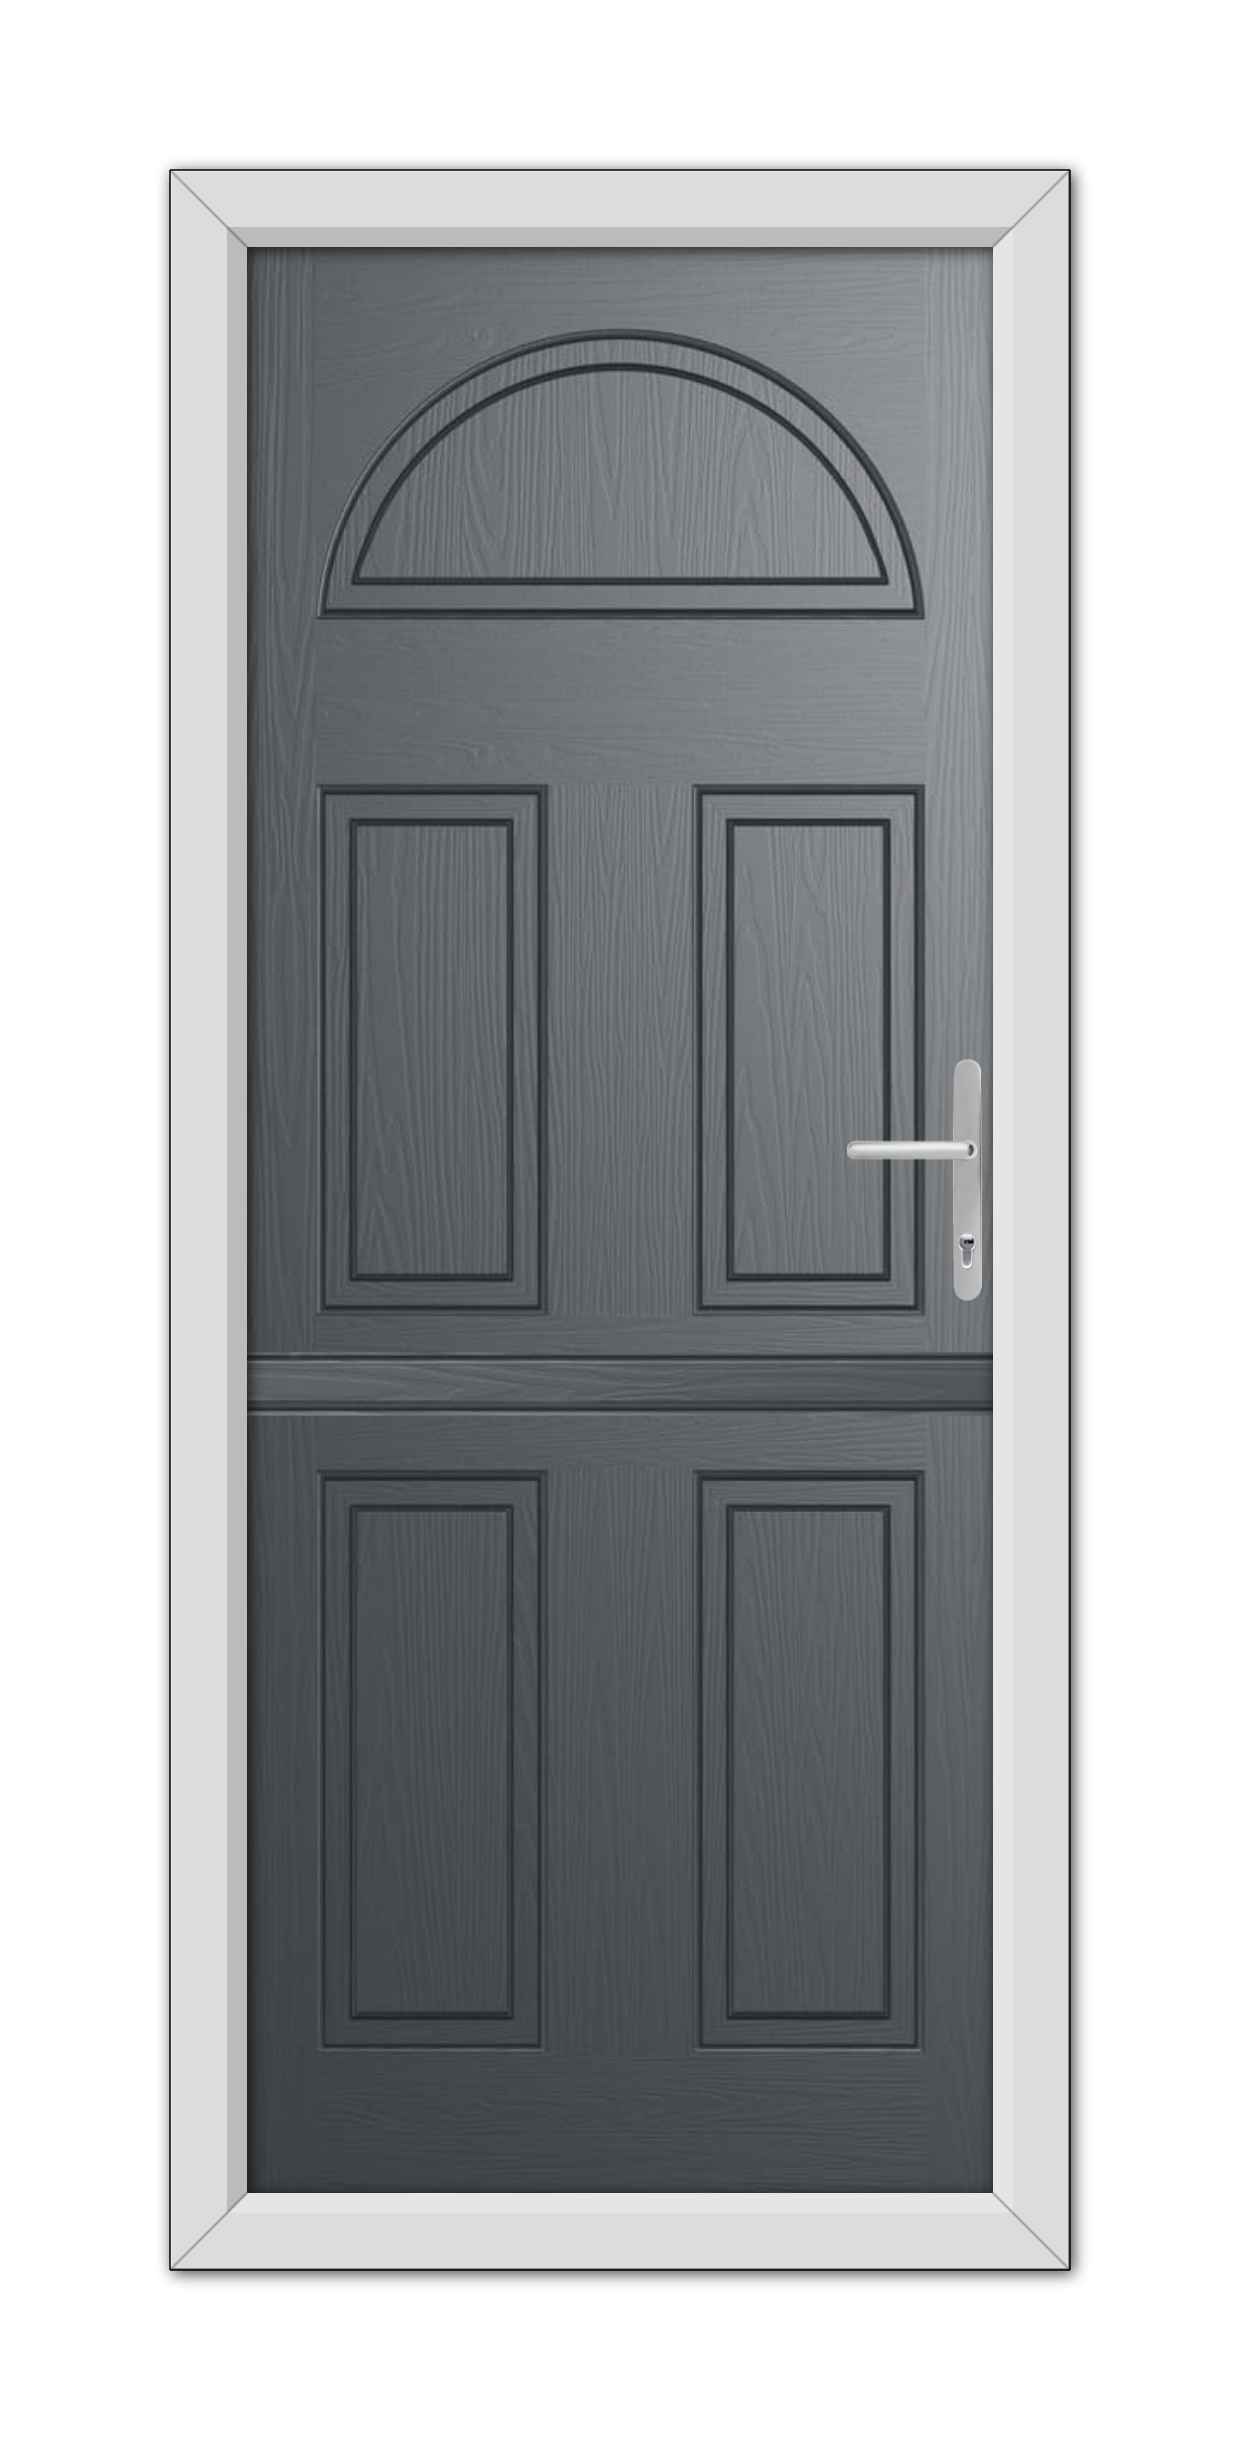 A modern Anthracite Grey Winslow Solid Stable Composite Door 48mm Timber Core with six panels, a semi-circular window at the top, and a silver handle, set within a white frame.